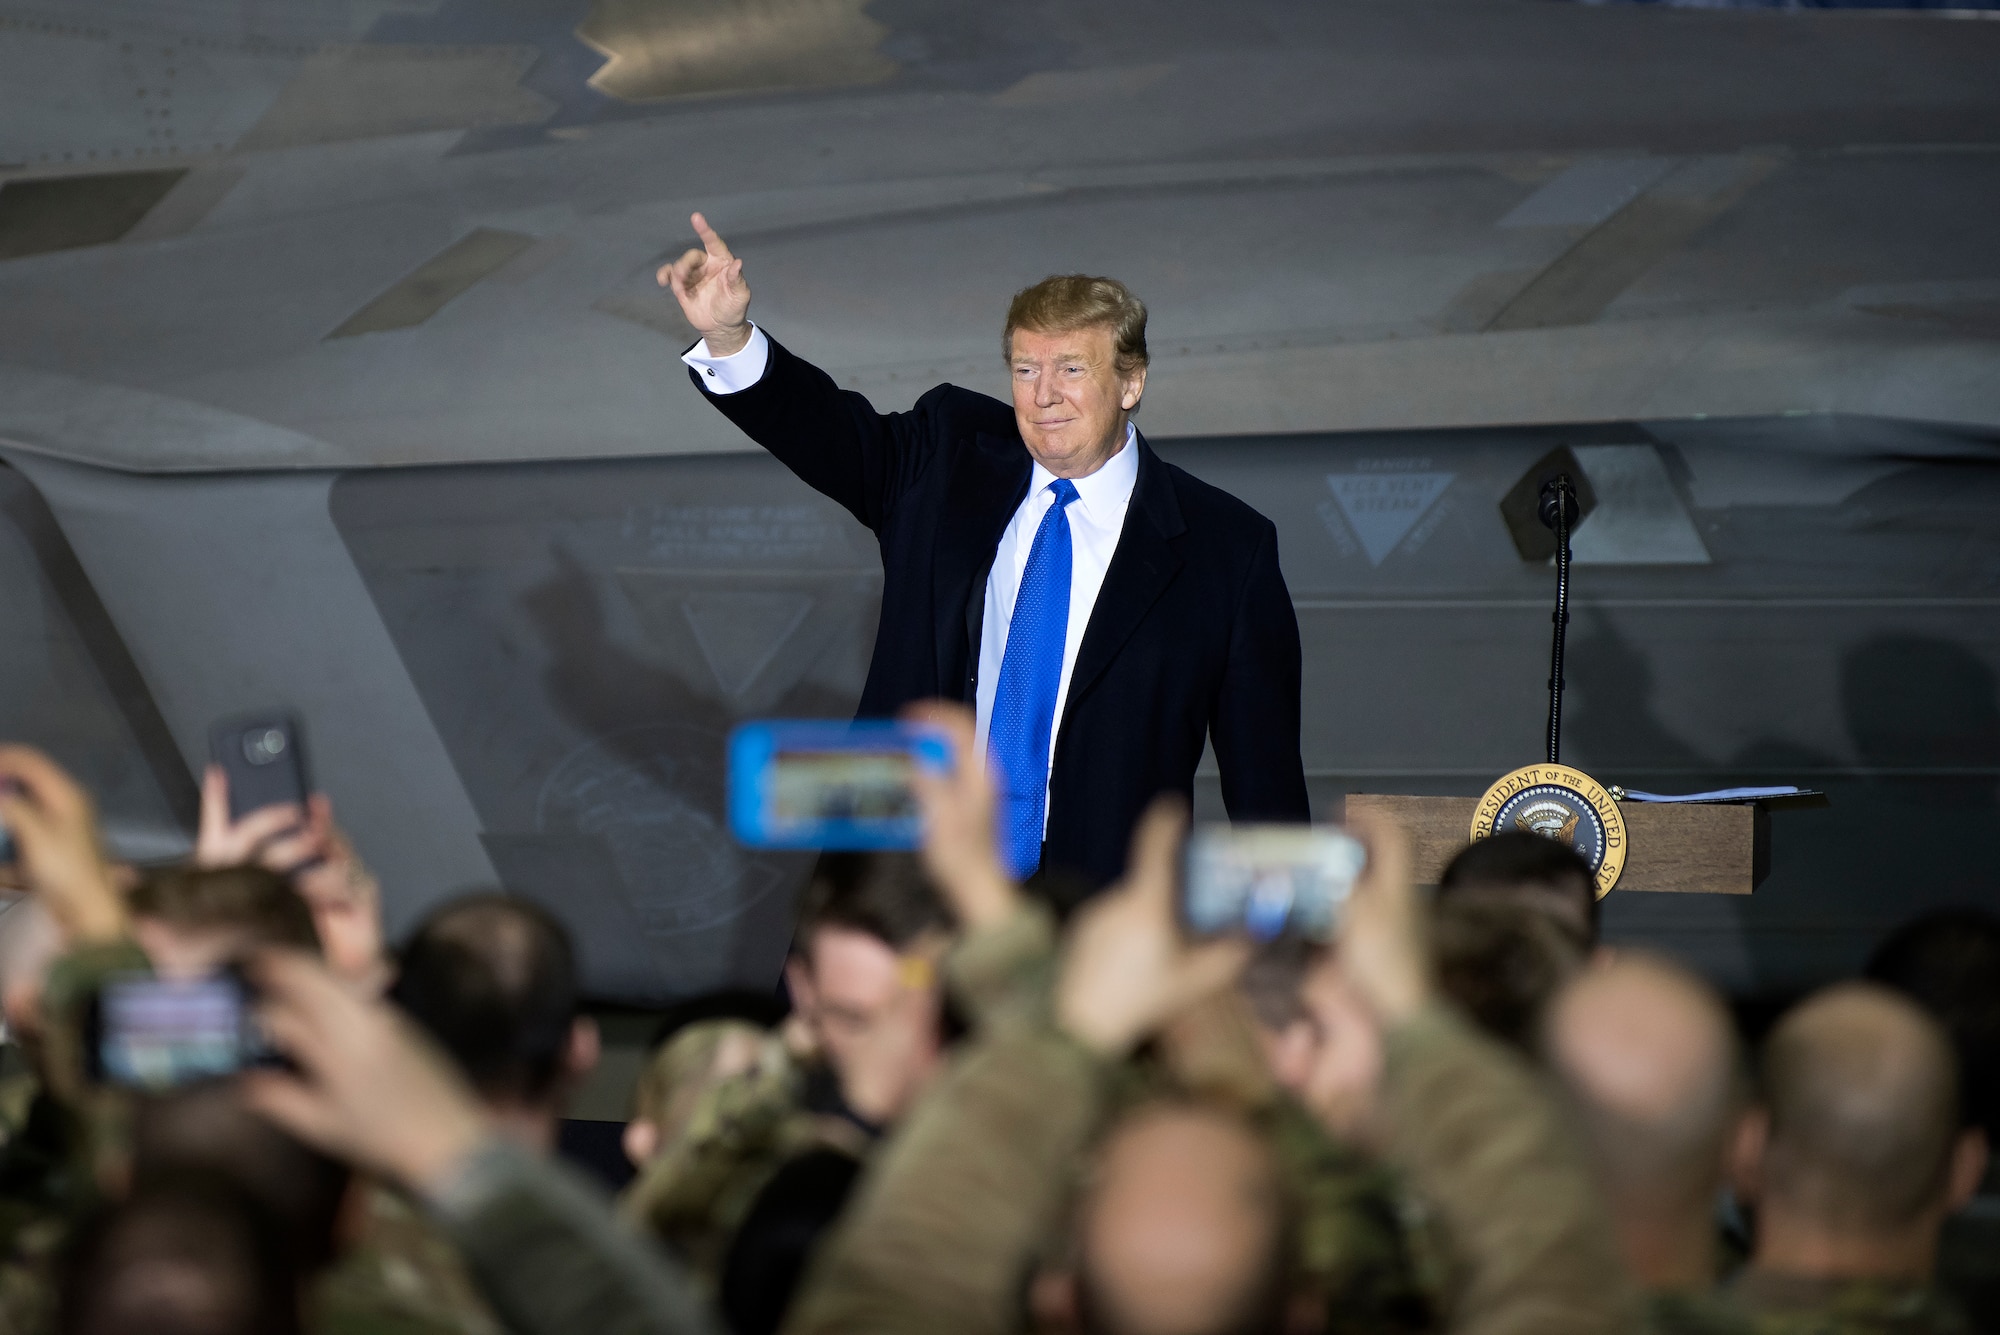 President Donald Trump speaks to service members at Joint Base Elmendorf-Richardson, Alaska, Feb. 28, 2019. The President was at the base to meet with service members after returning from a summit in Hanoi, Vietnam. (U.S. Air Force photo by Staff Sgt. Westin Warburton)